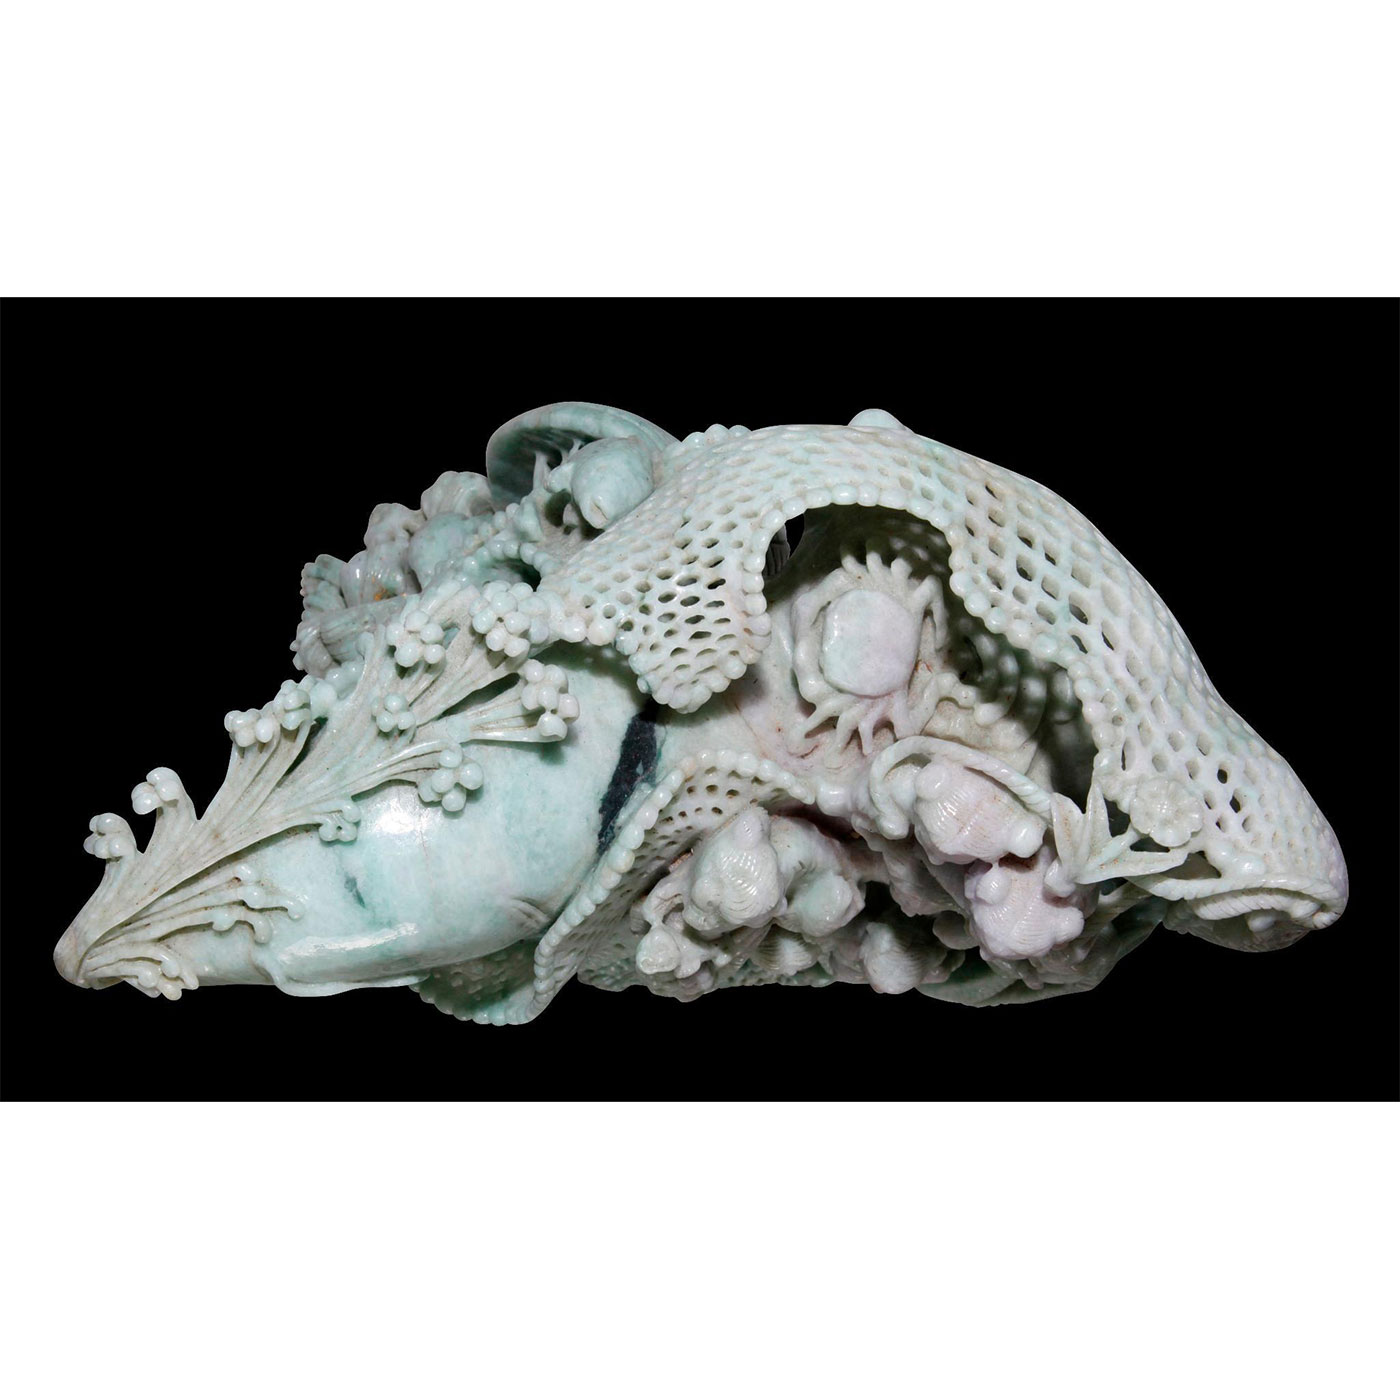 CHINESE CARVED JADE MONUMENTAL FIGURAL GROUP, CARP FISH AND IMMORTALS - Image 7 of 10